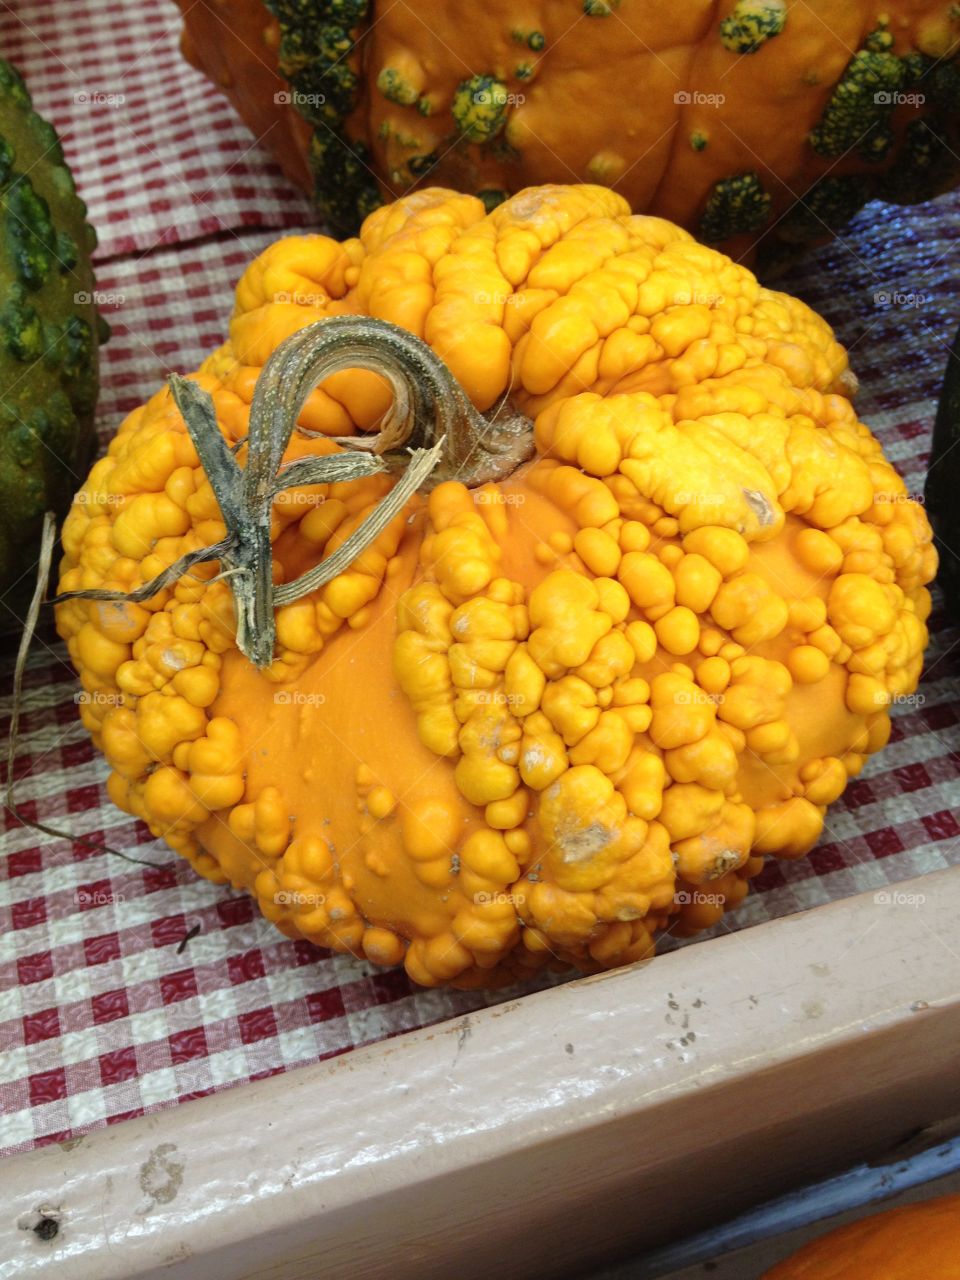 Warts. This wart filled pumpkin is just spooky enough for Halloween 